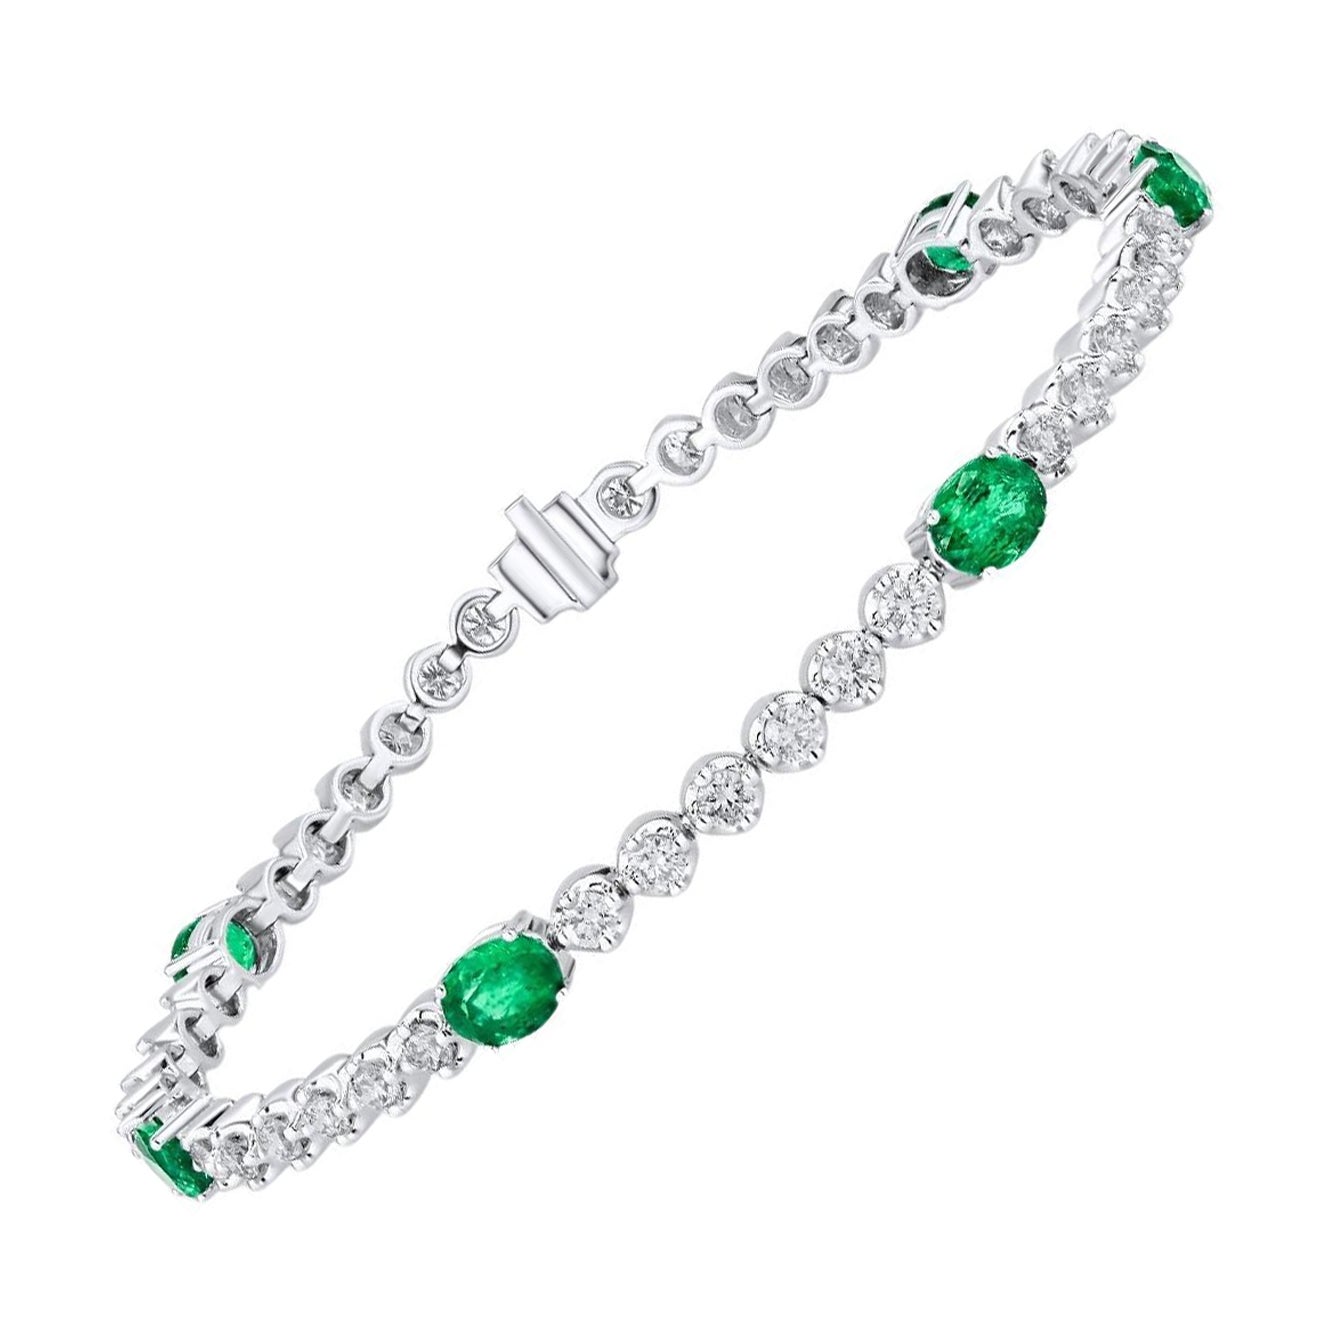 2.70 Carat Oval Cut Emerald and Diamond Tennis Bracelet in 14k White Gold ref504 For Sale